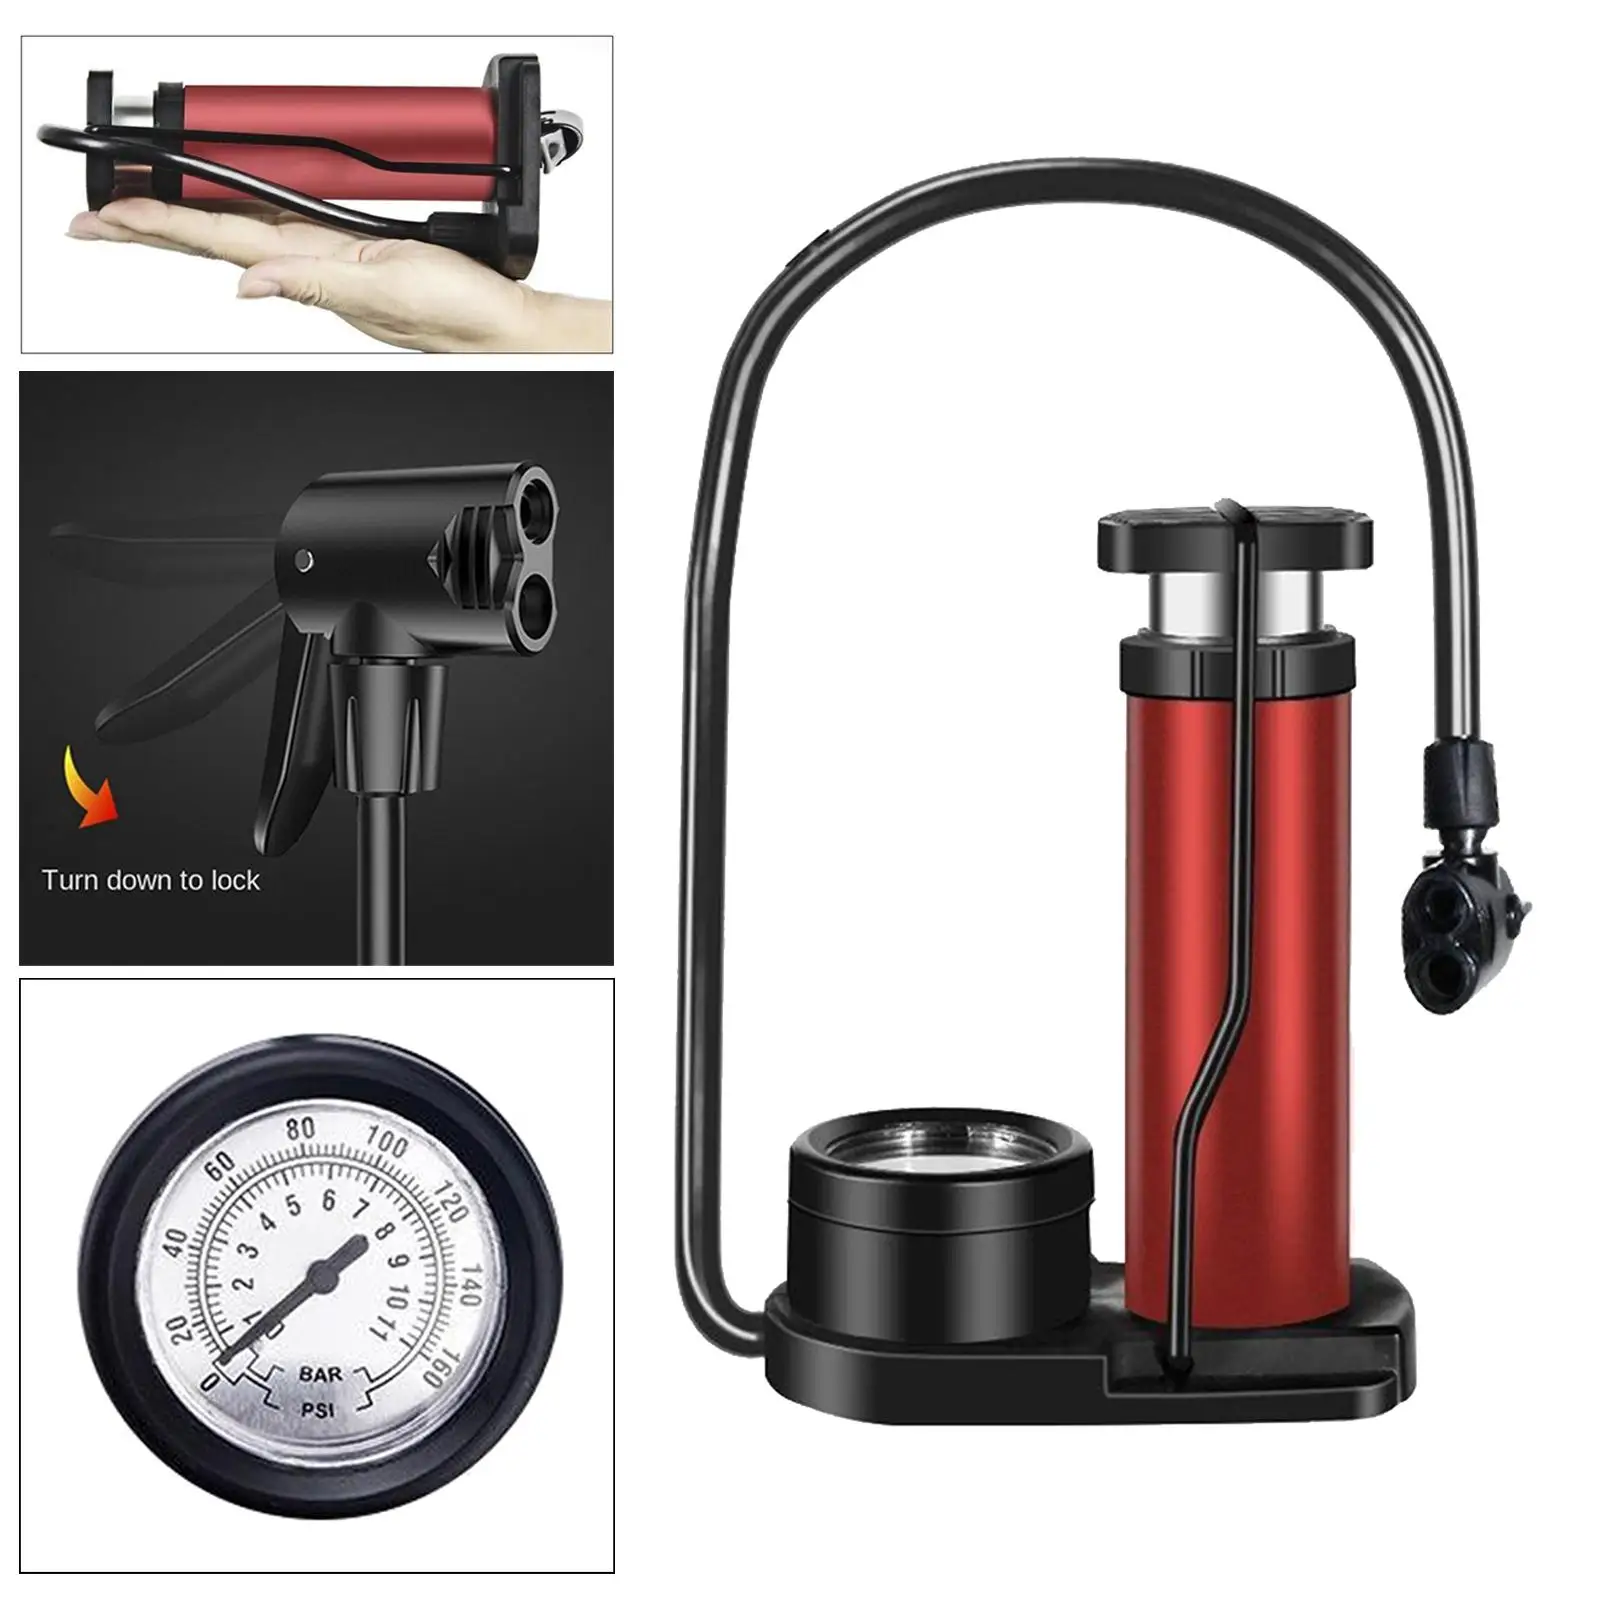 Portable Mini Tire Pump, Foot Activated Pump, Tyre Inflator with Pressure Gauge for Bikes, Motorcycles